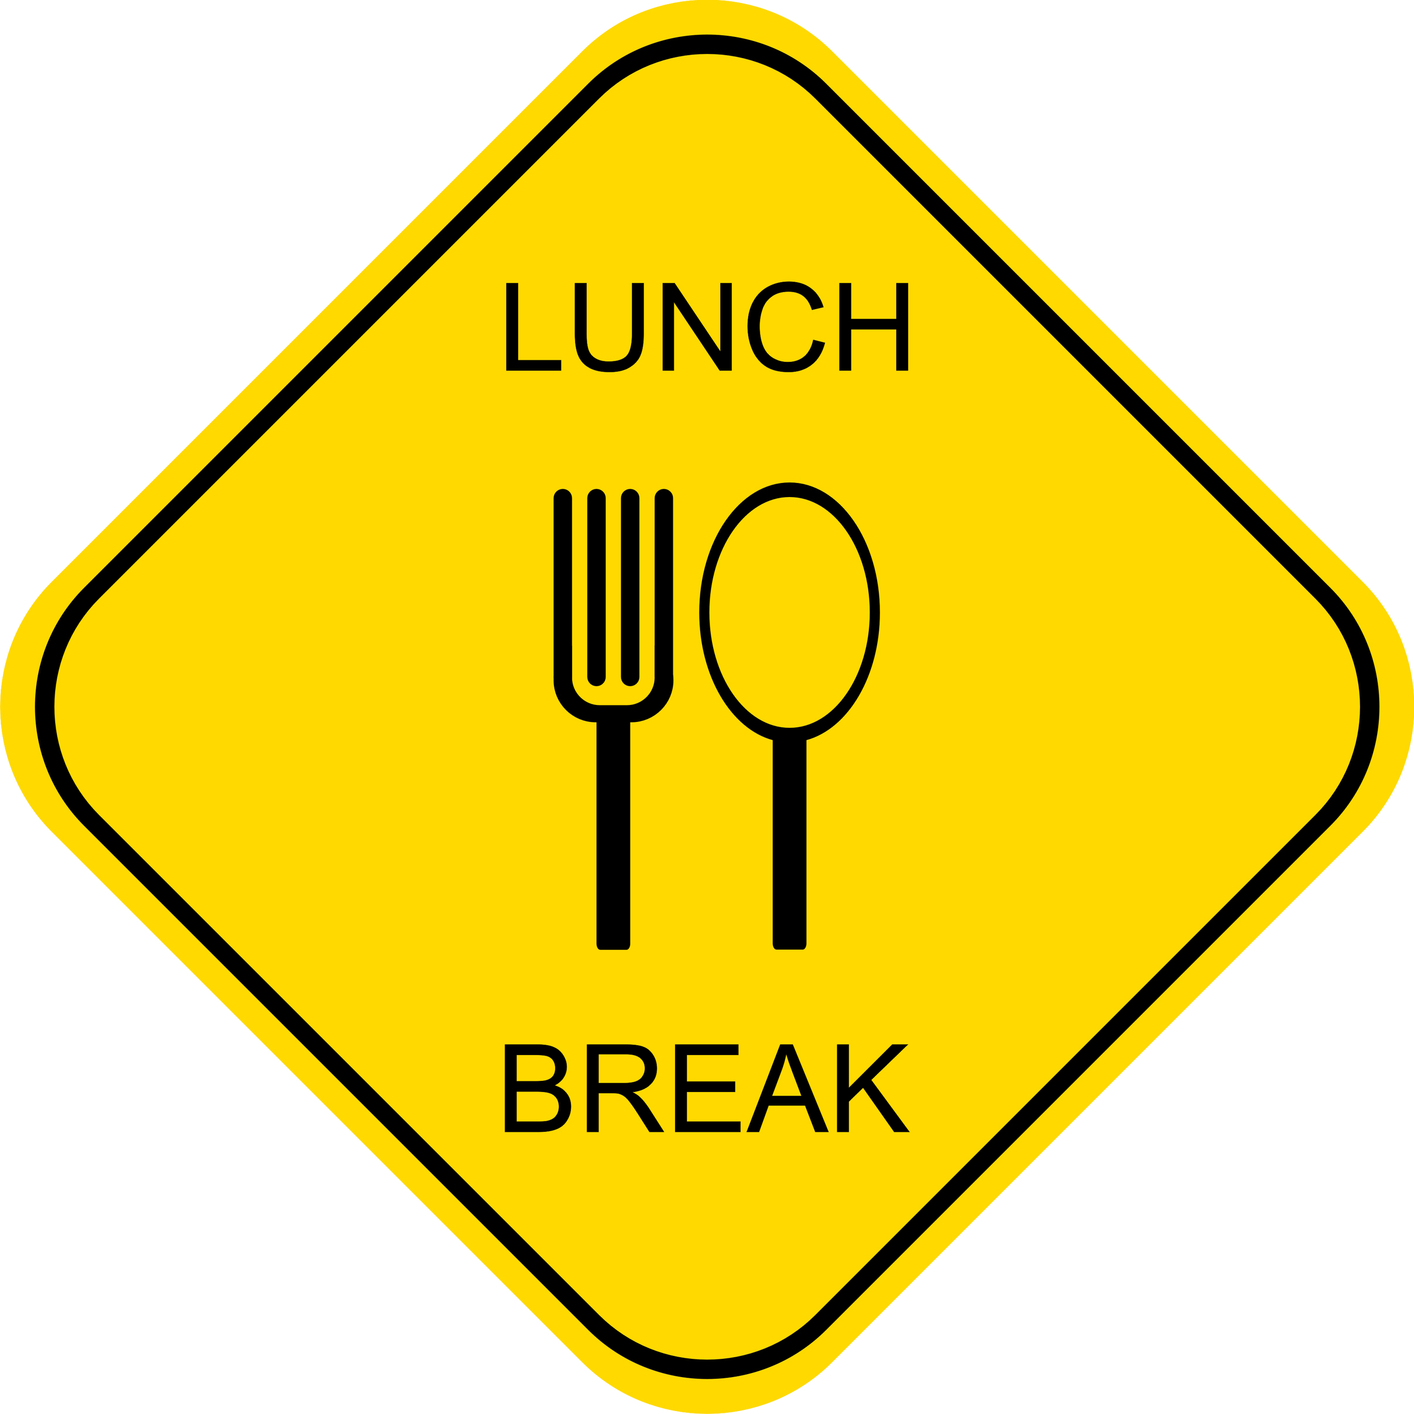 Lunch Break Sign drawing free image download